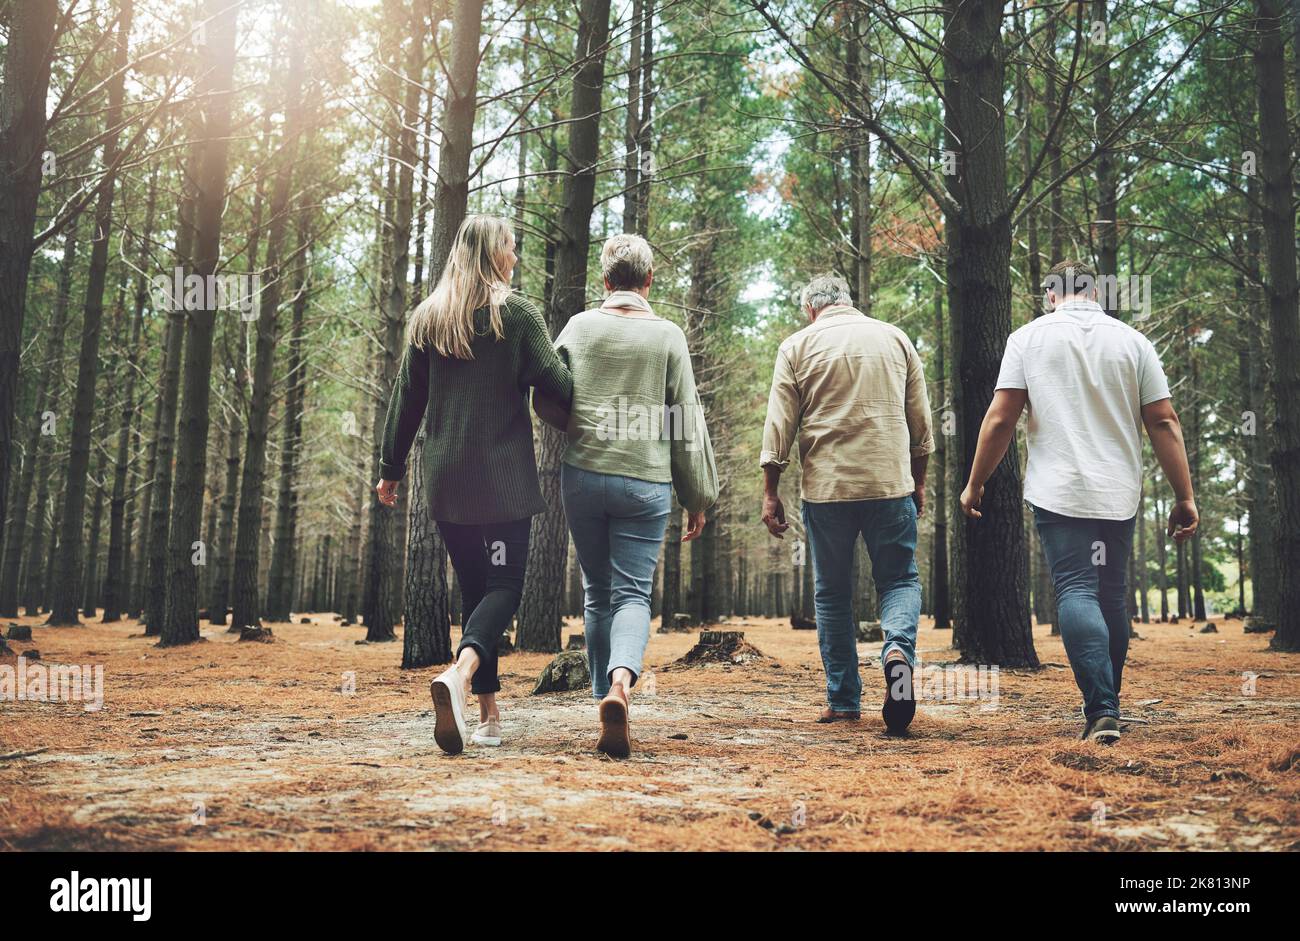 Family, friends and forest adventure with parents and adult children walking in nature for outdoor hiking, fun and trees on wellness vacation. Running Stock Photo